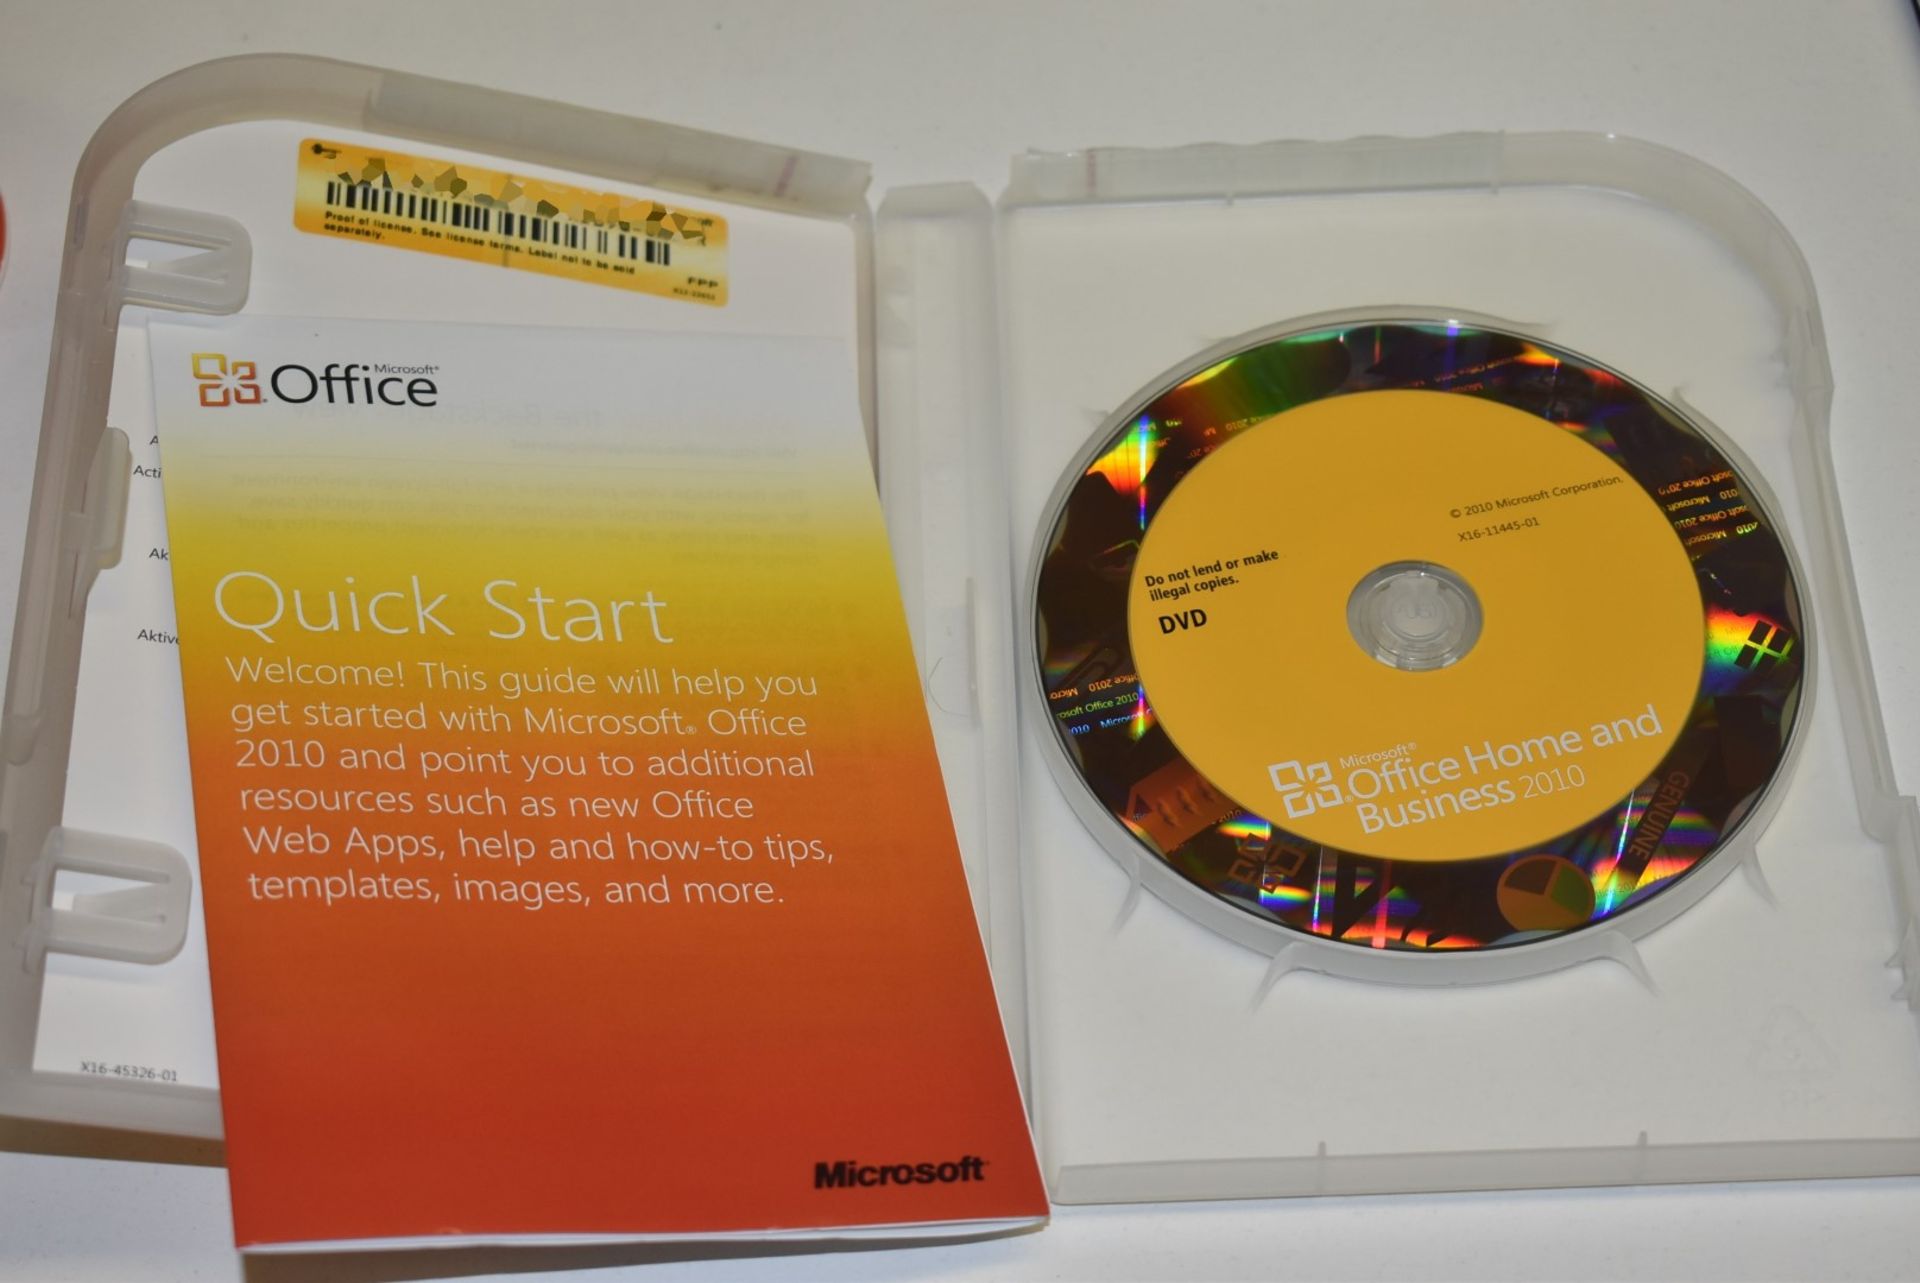 1 x Microsoft Office 2010 Home and Business - Activation Key Card With Original Box - Ref: MPC610 CG - Image 2 of 2